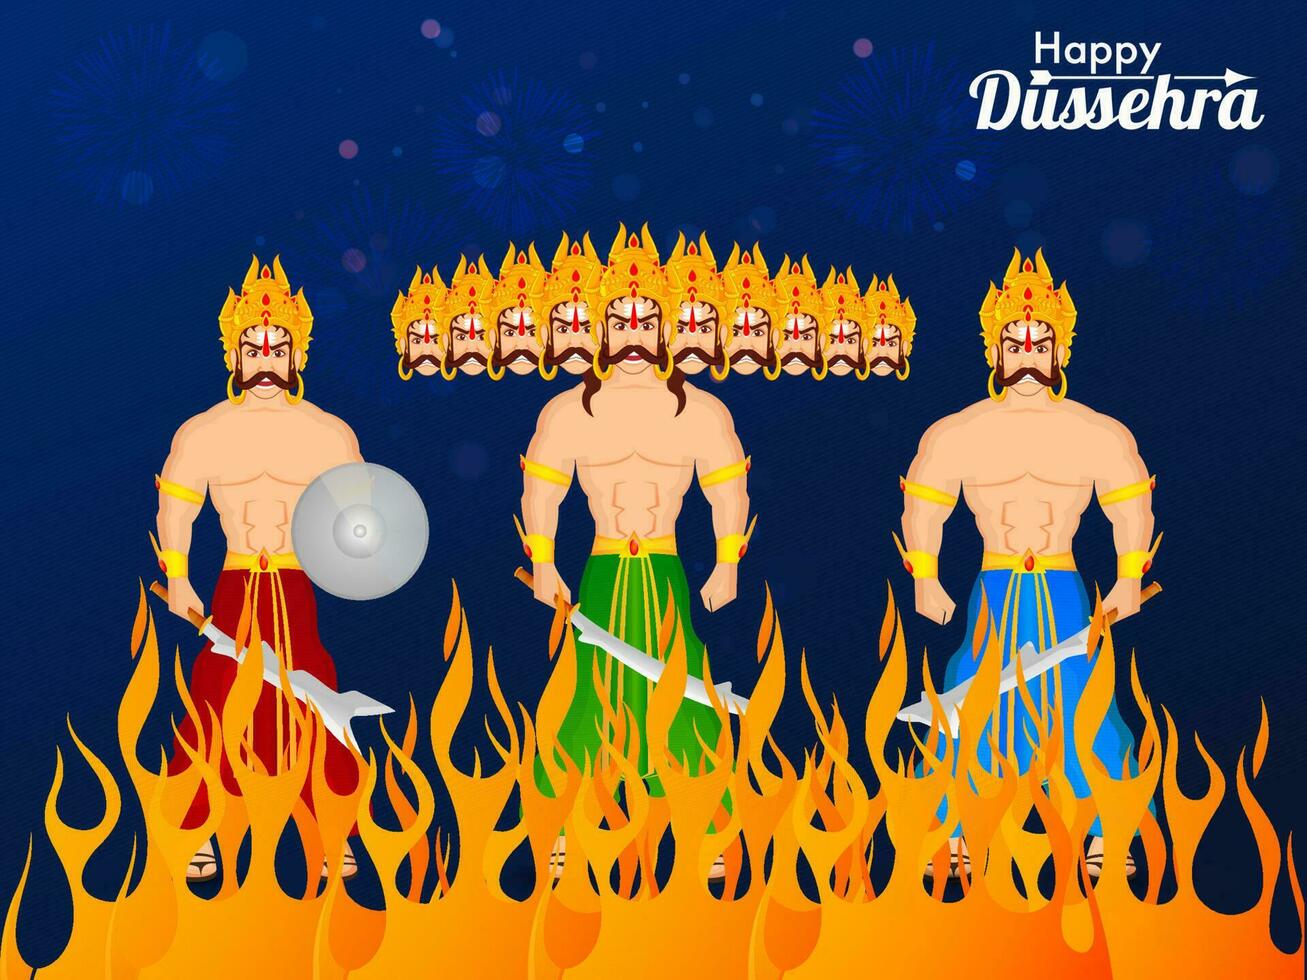 Hindu Mythological Demon King Ravana With His Brother Kumbhkarana And Son Meghnad Standing On Fire Blue Background For Happy Dussehra Concept. vector